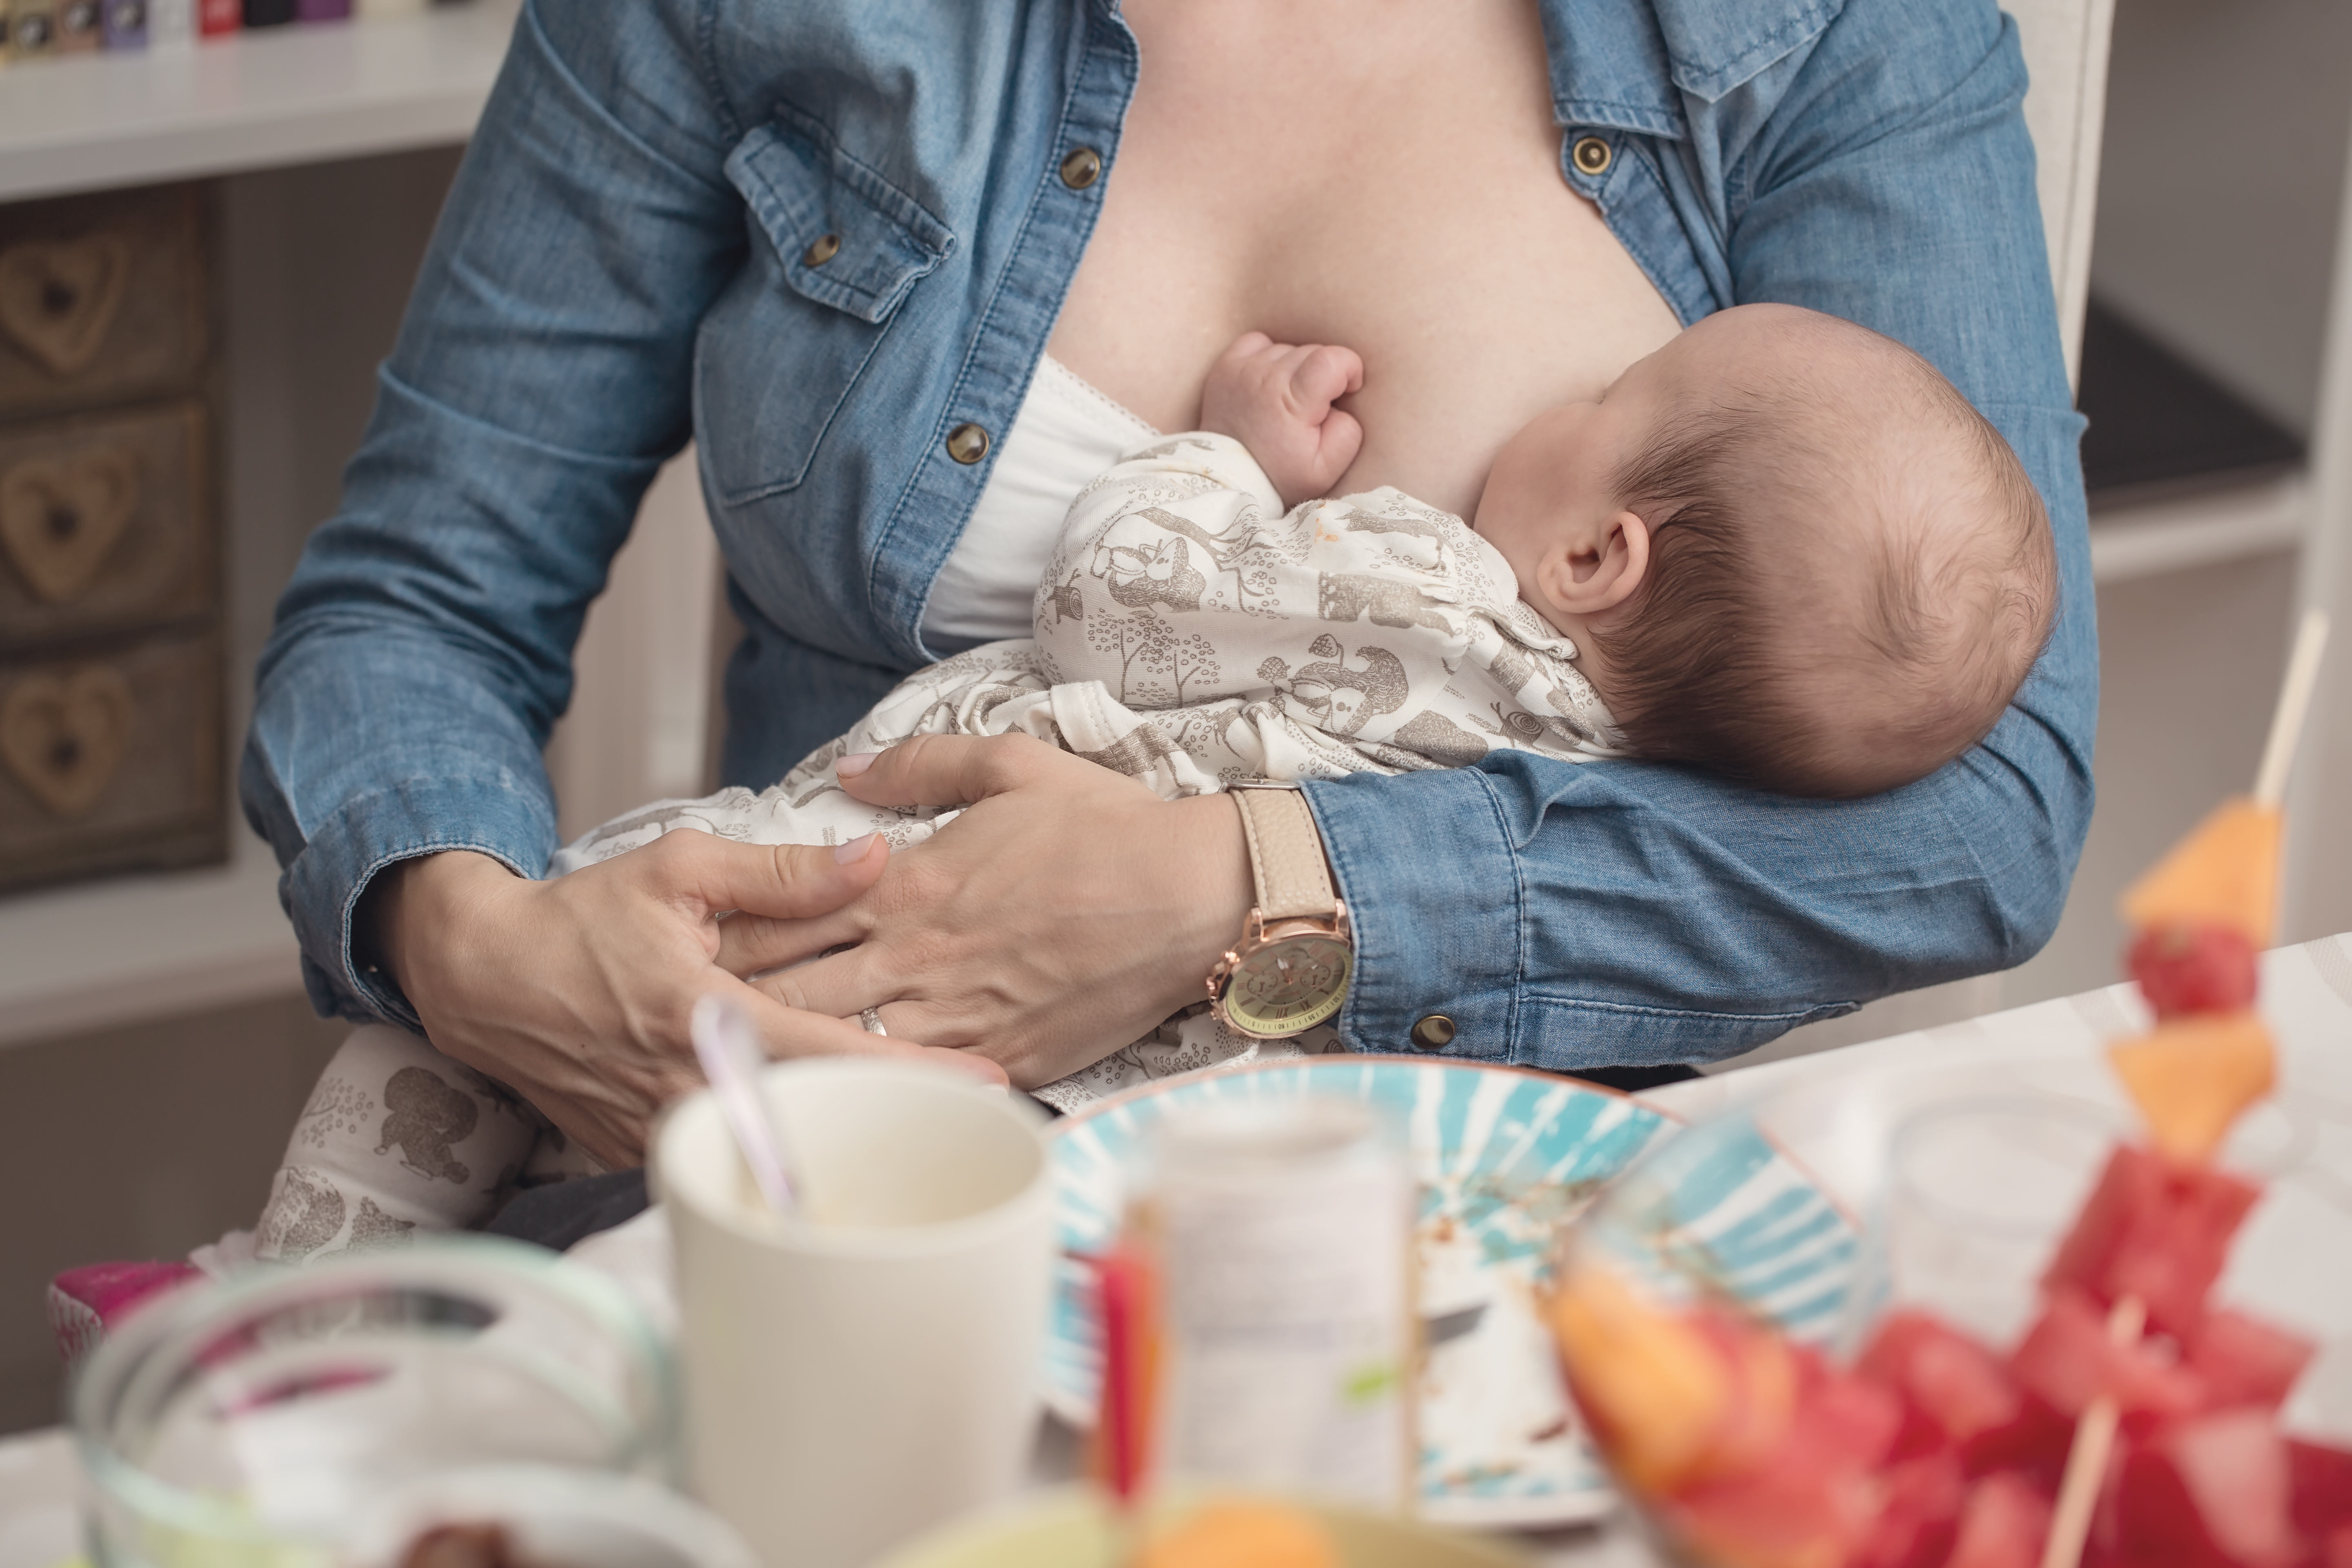 Free Breastfeeding Supplies: Where to Find Them and How to Get Them -  Mothers Need